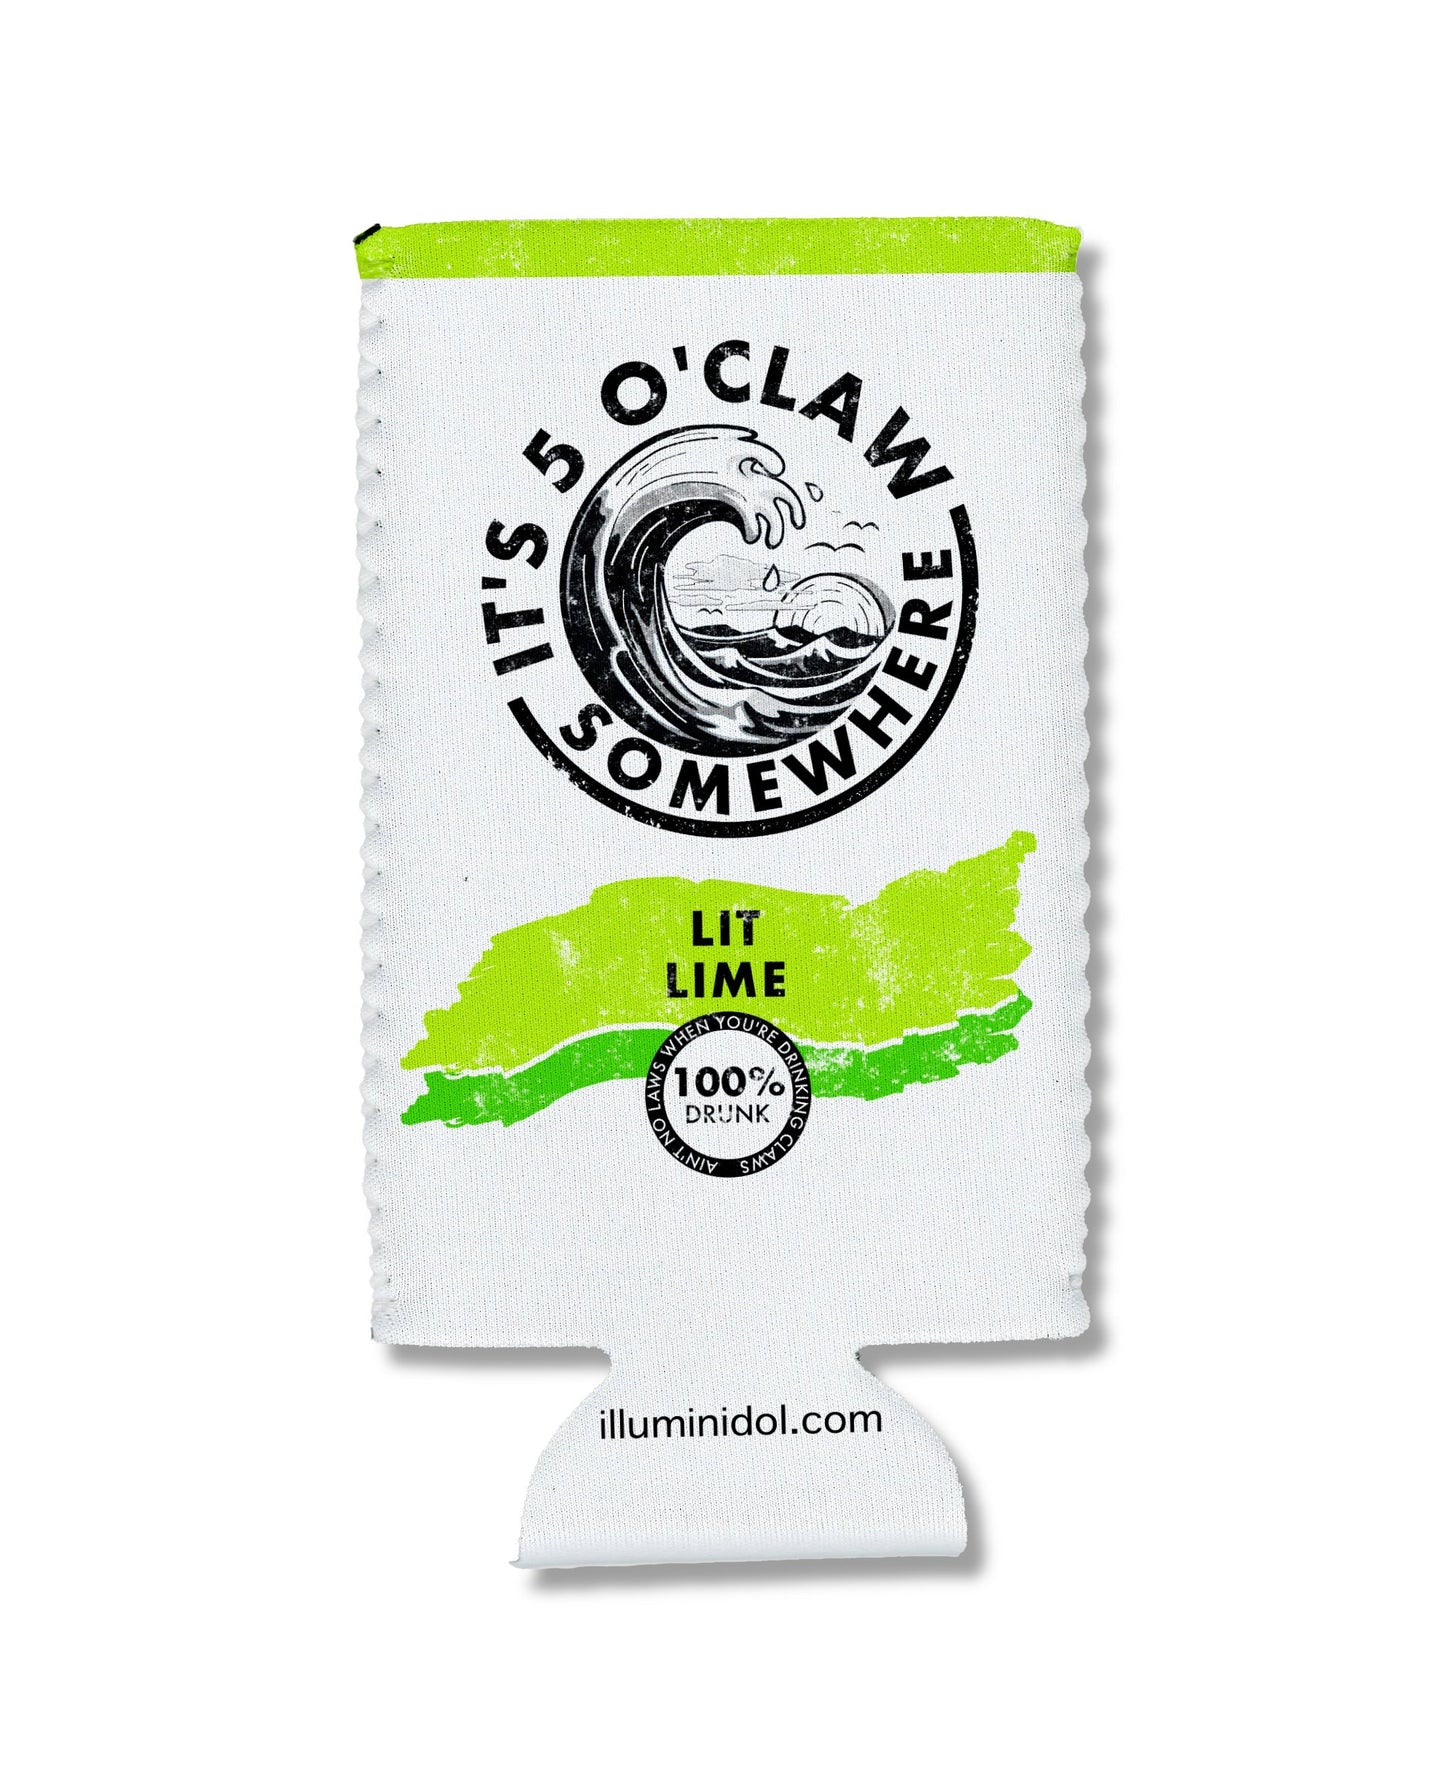 "It's 5 O'Claw Somewhere" Lit Lime Slim Can Hugger